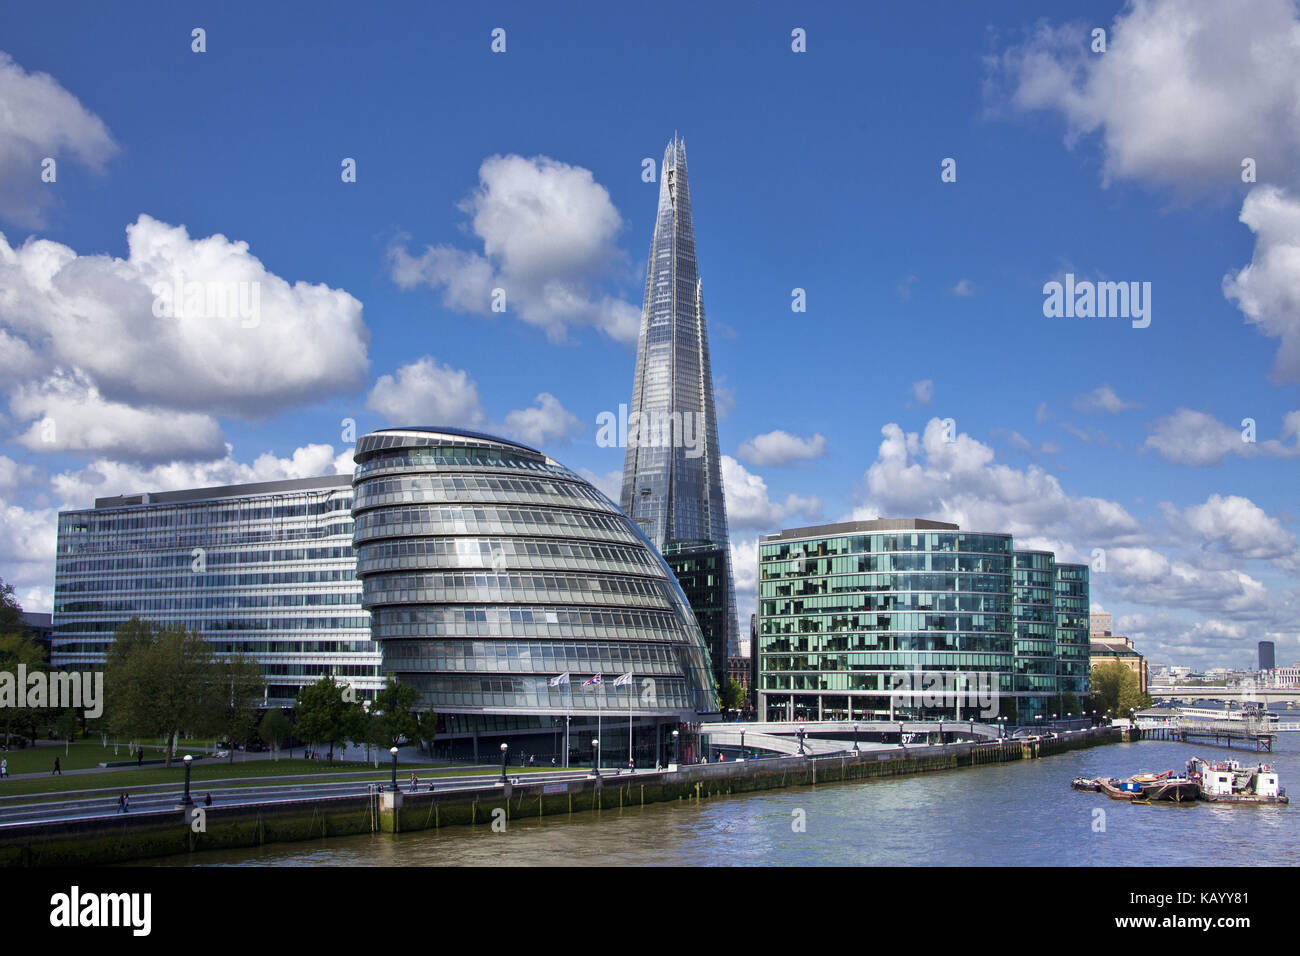 Great Britain, London, bank of River Thames, architecture, city sound, city hall, skyscraper, The Shard, Stock Photo